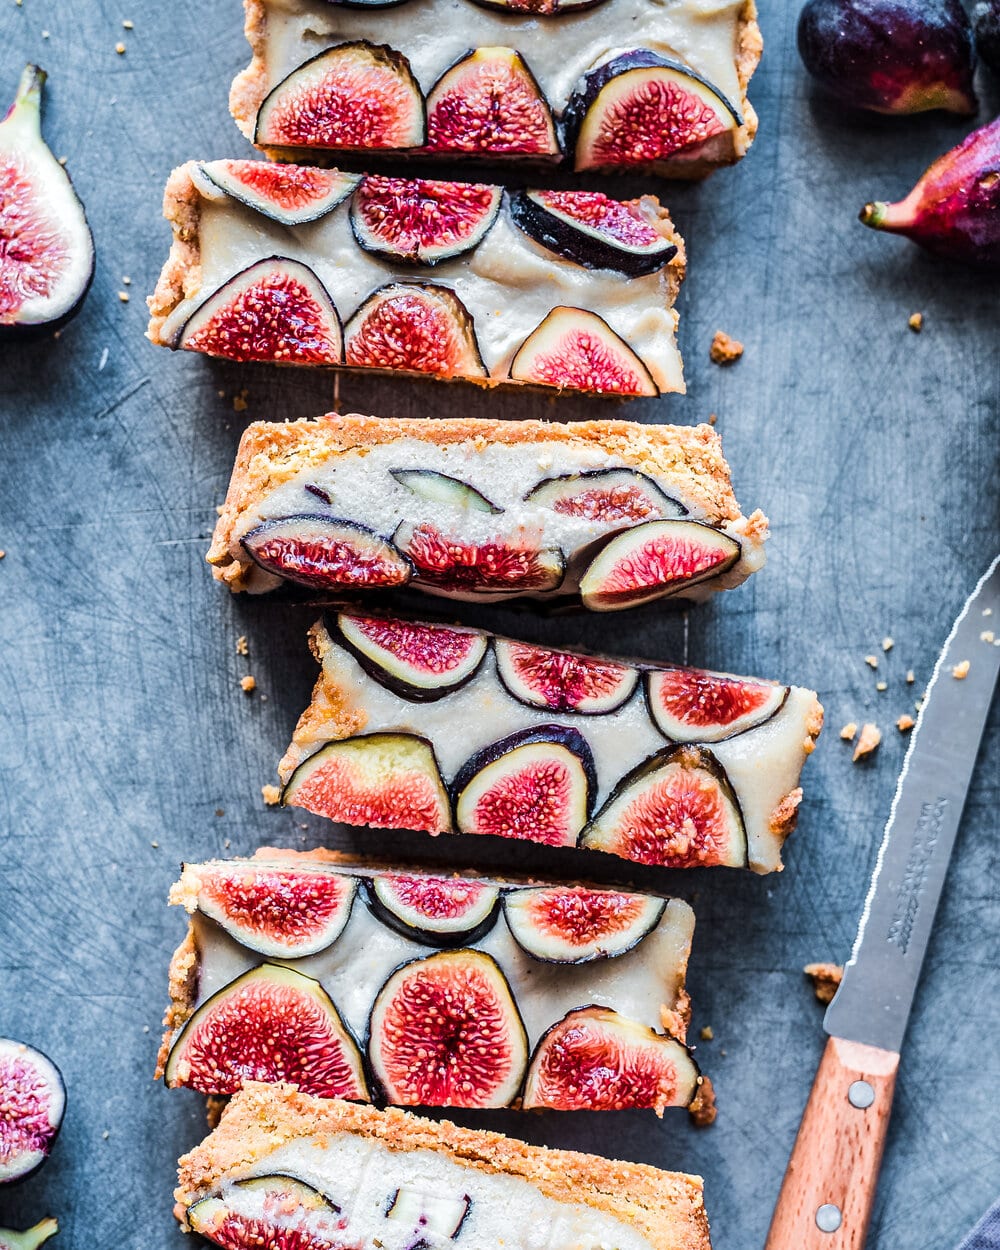 Slices of fig tart next to knife and figs on table.